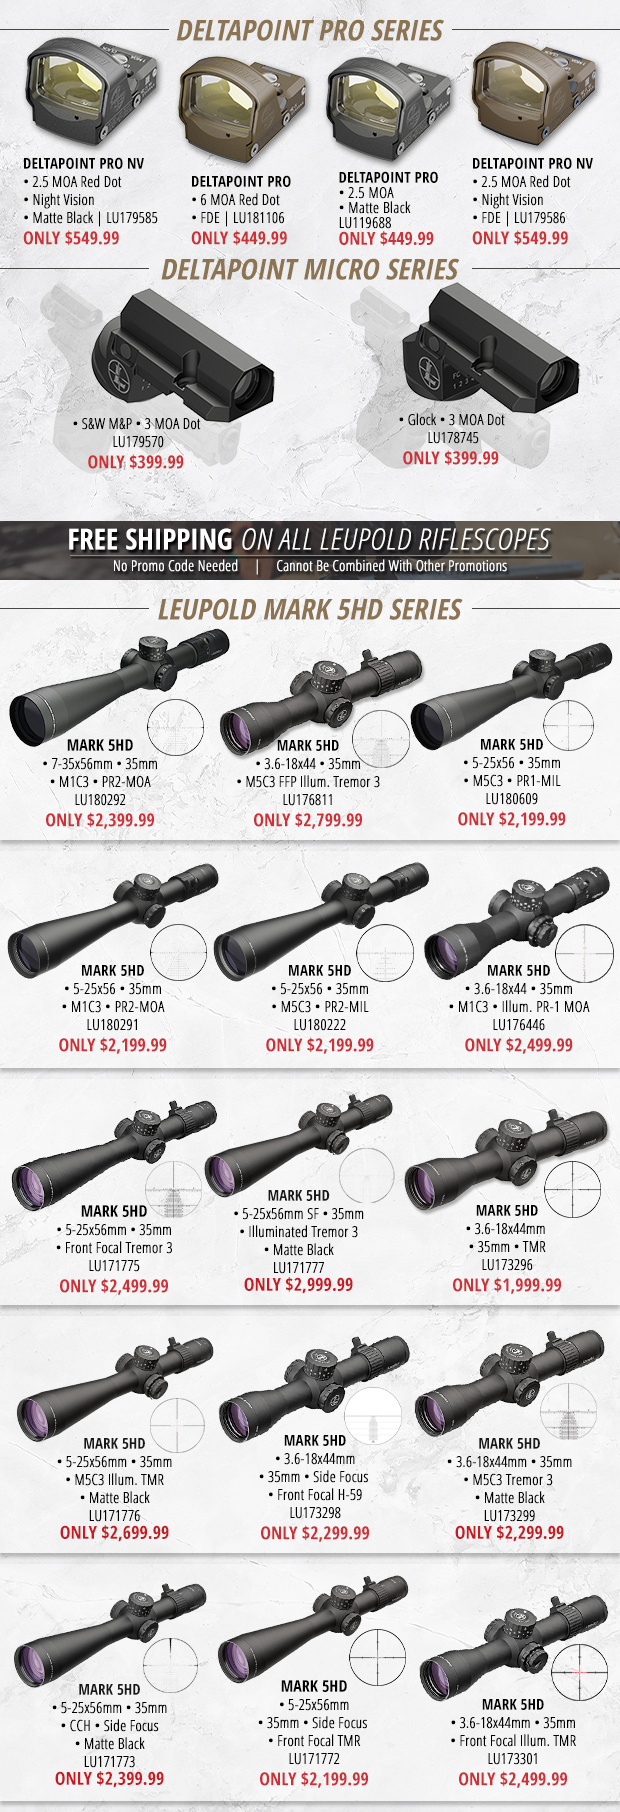 Must-Have Optics From Leupold